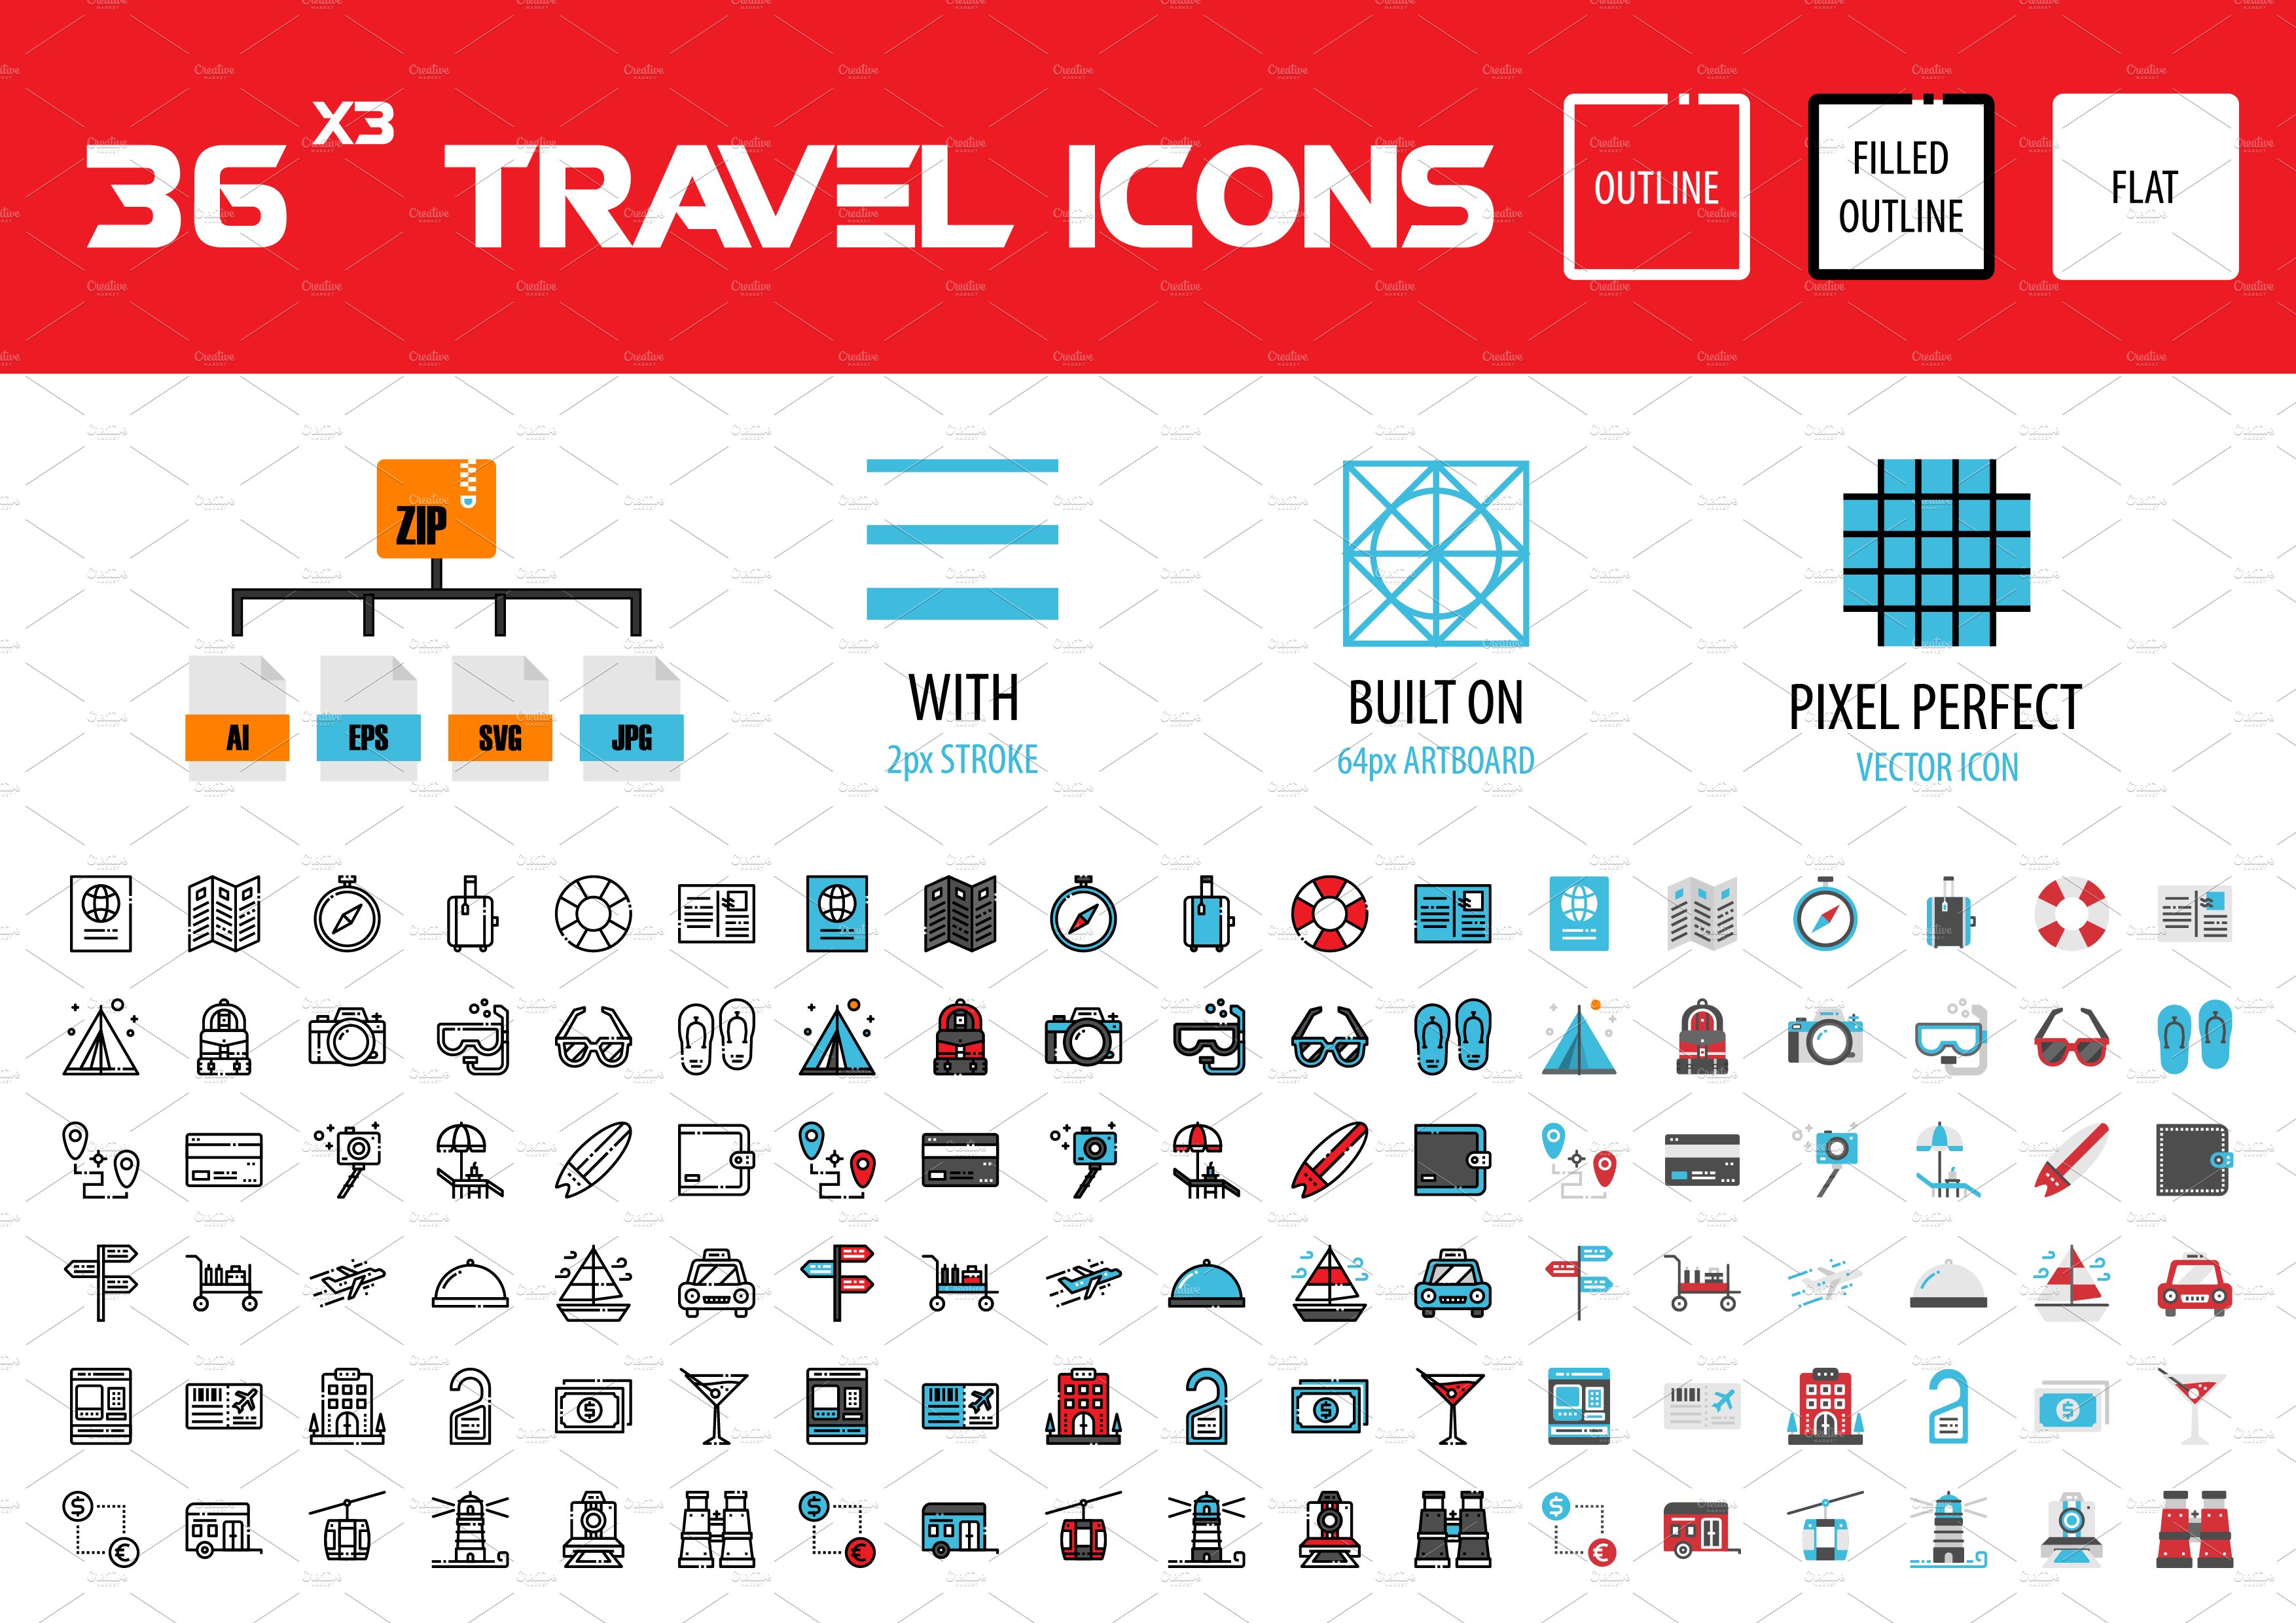 36x3 Travel icons preview image.